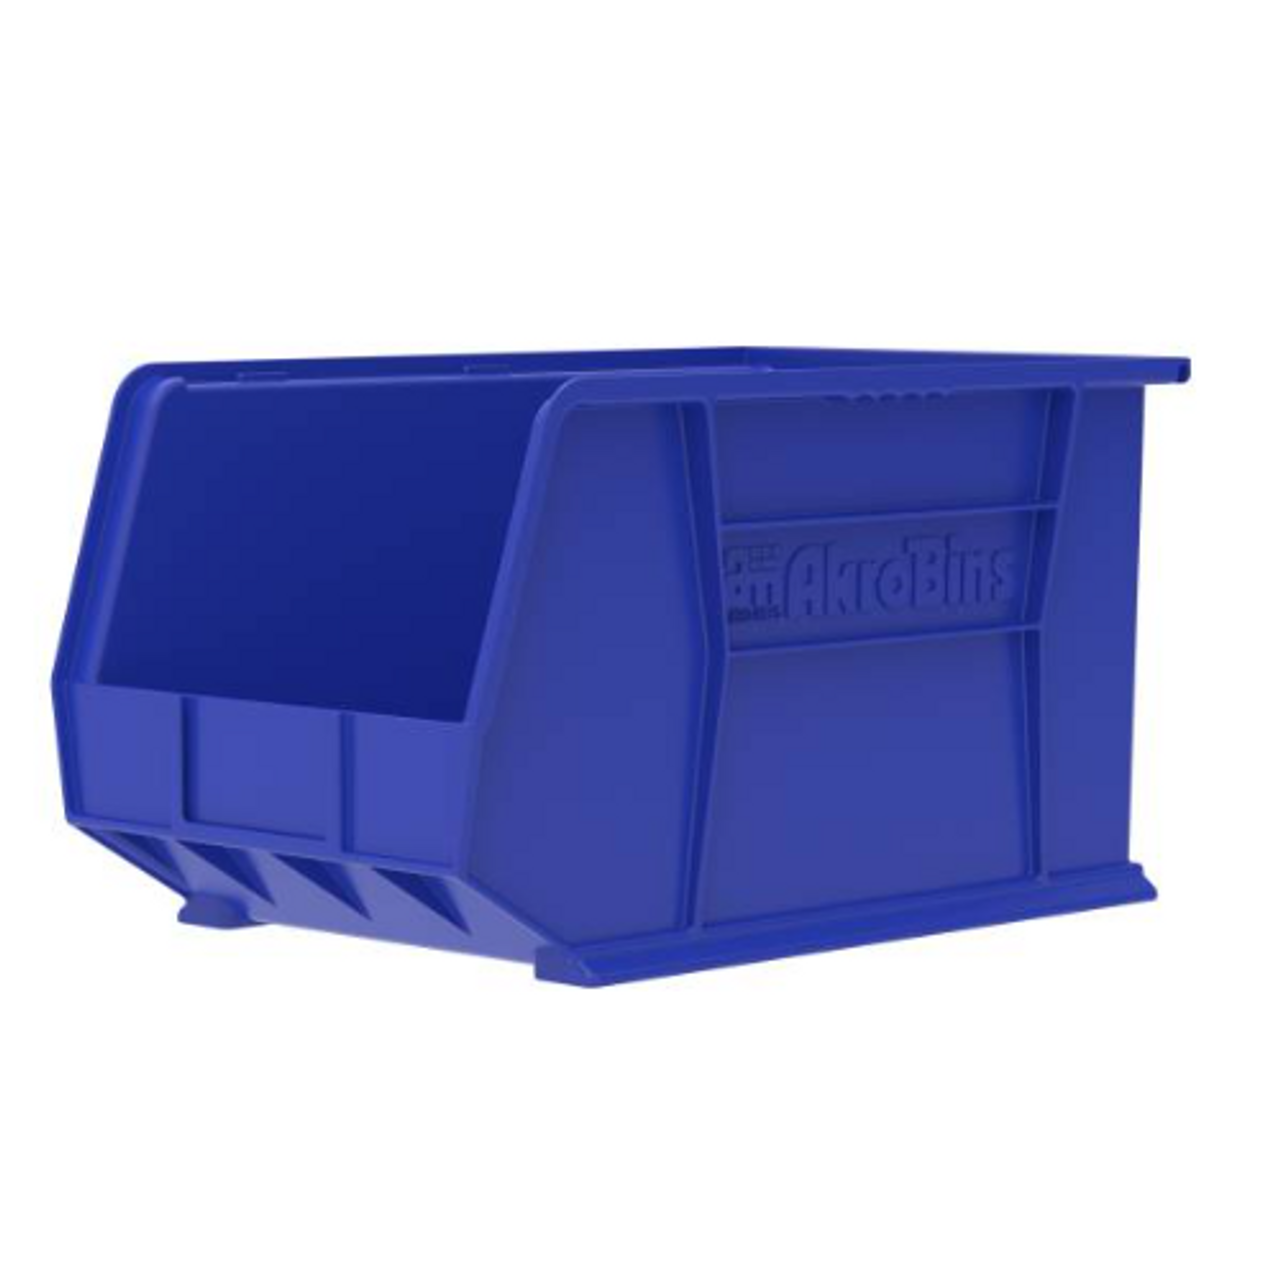 30260 18" x 11" x 10" Blue Hanging and Stacking Bin